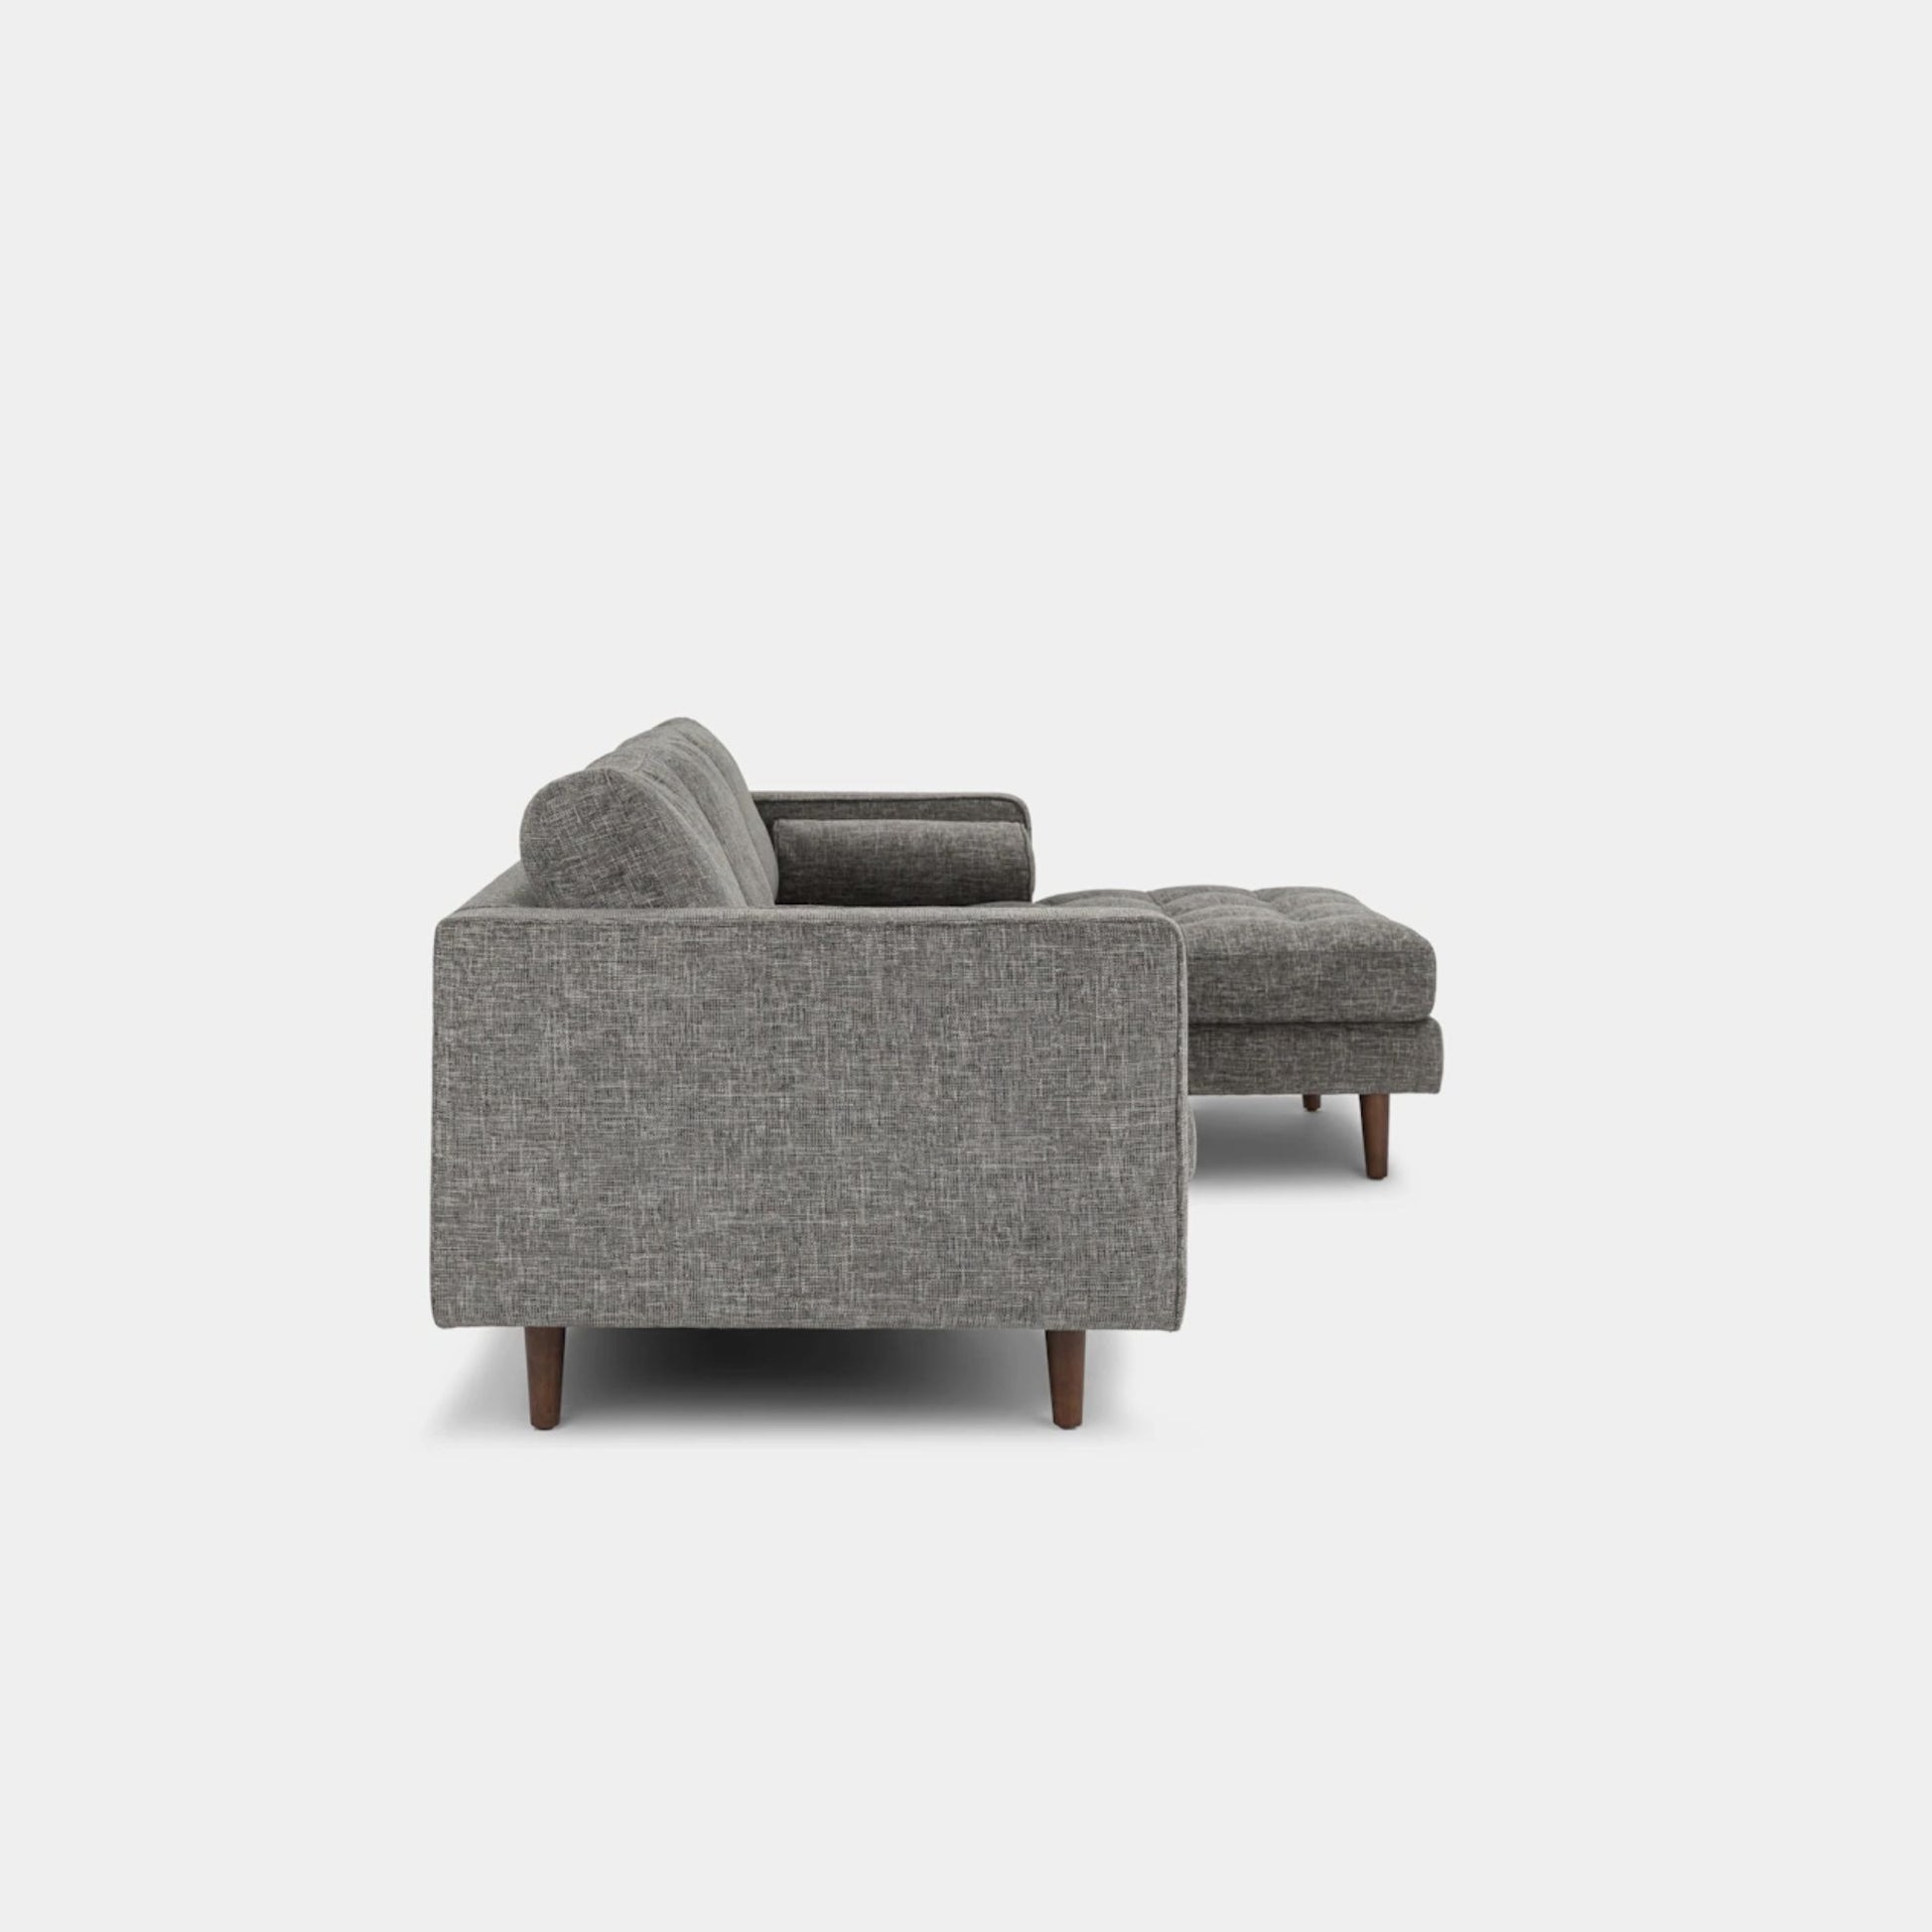 Castle fabric sectional sofa right grey